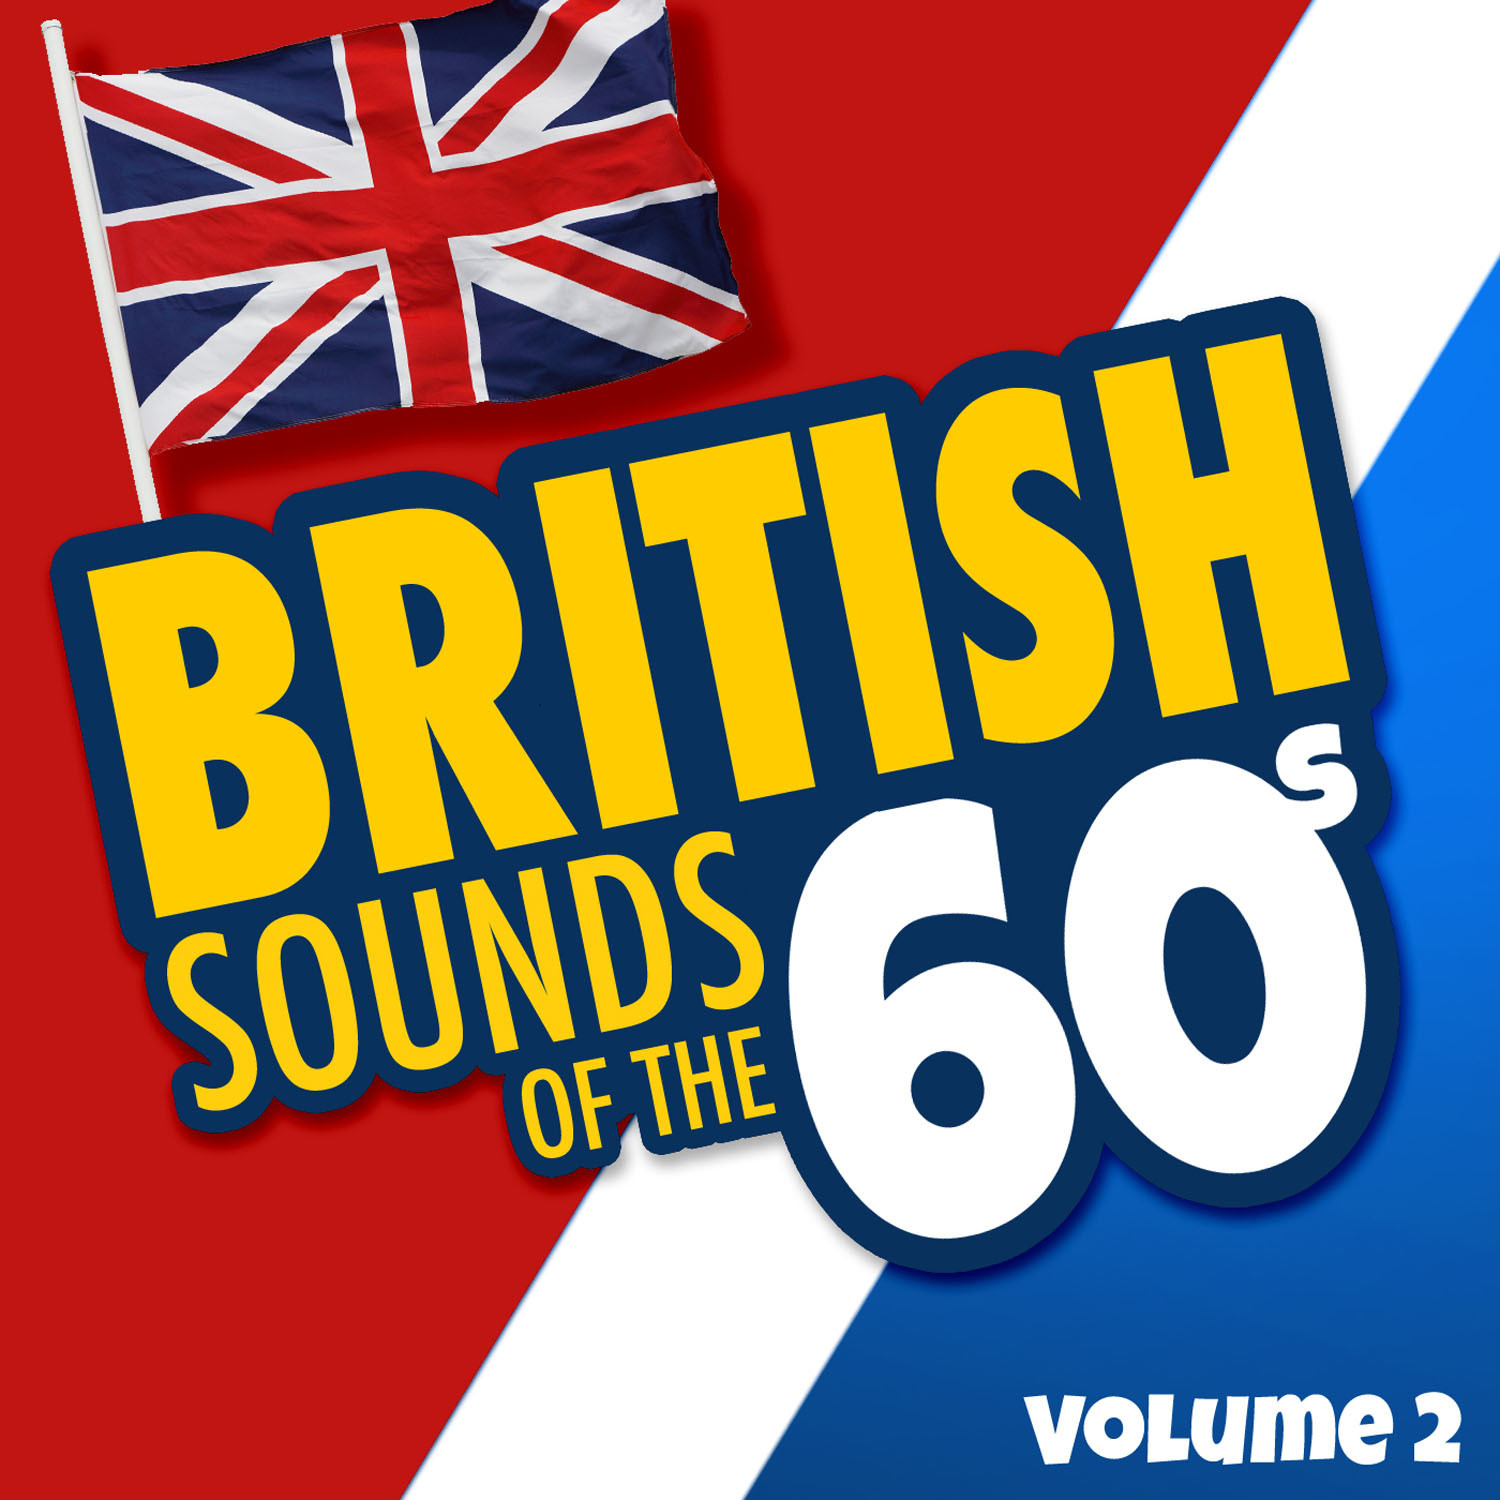 British Sounds of the 60's - Vol. 2